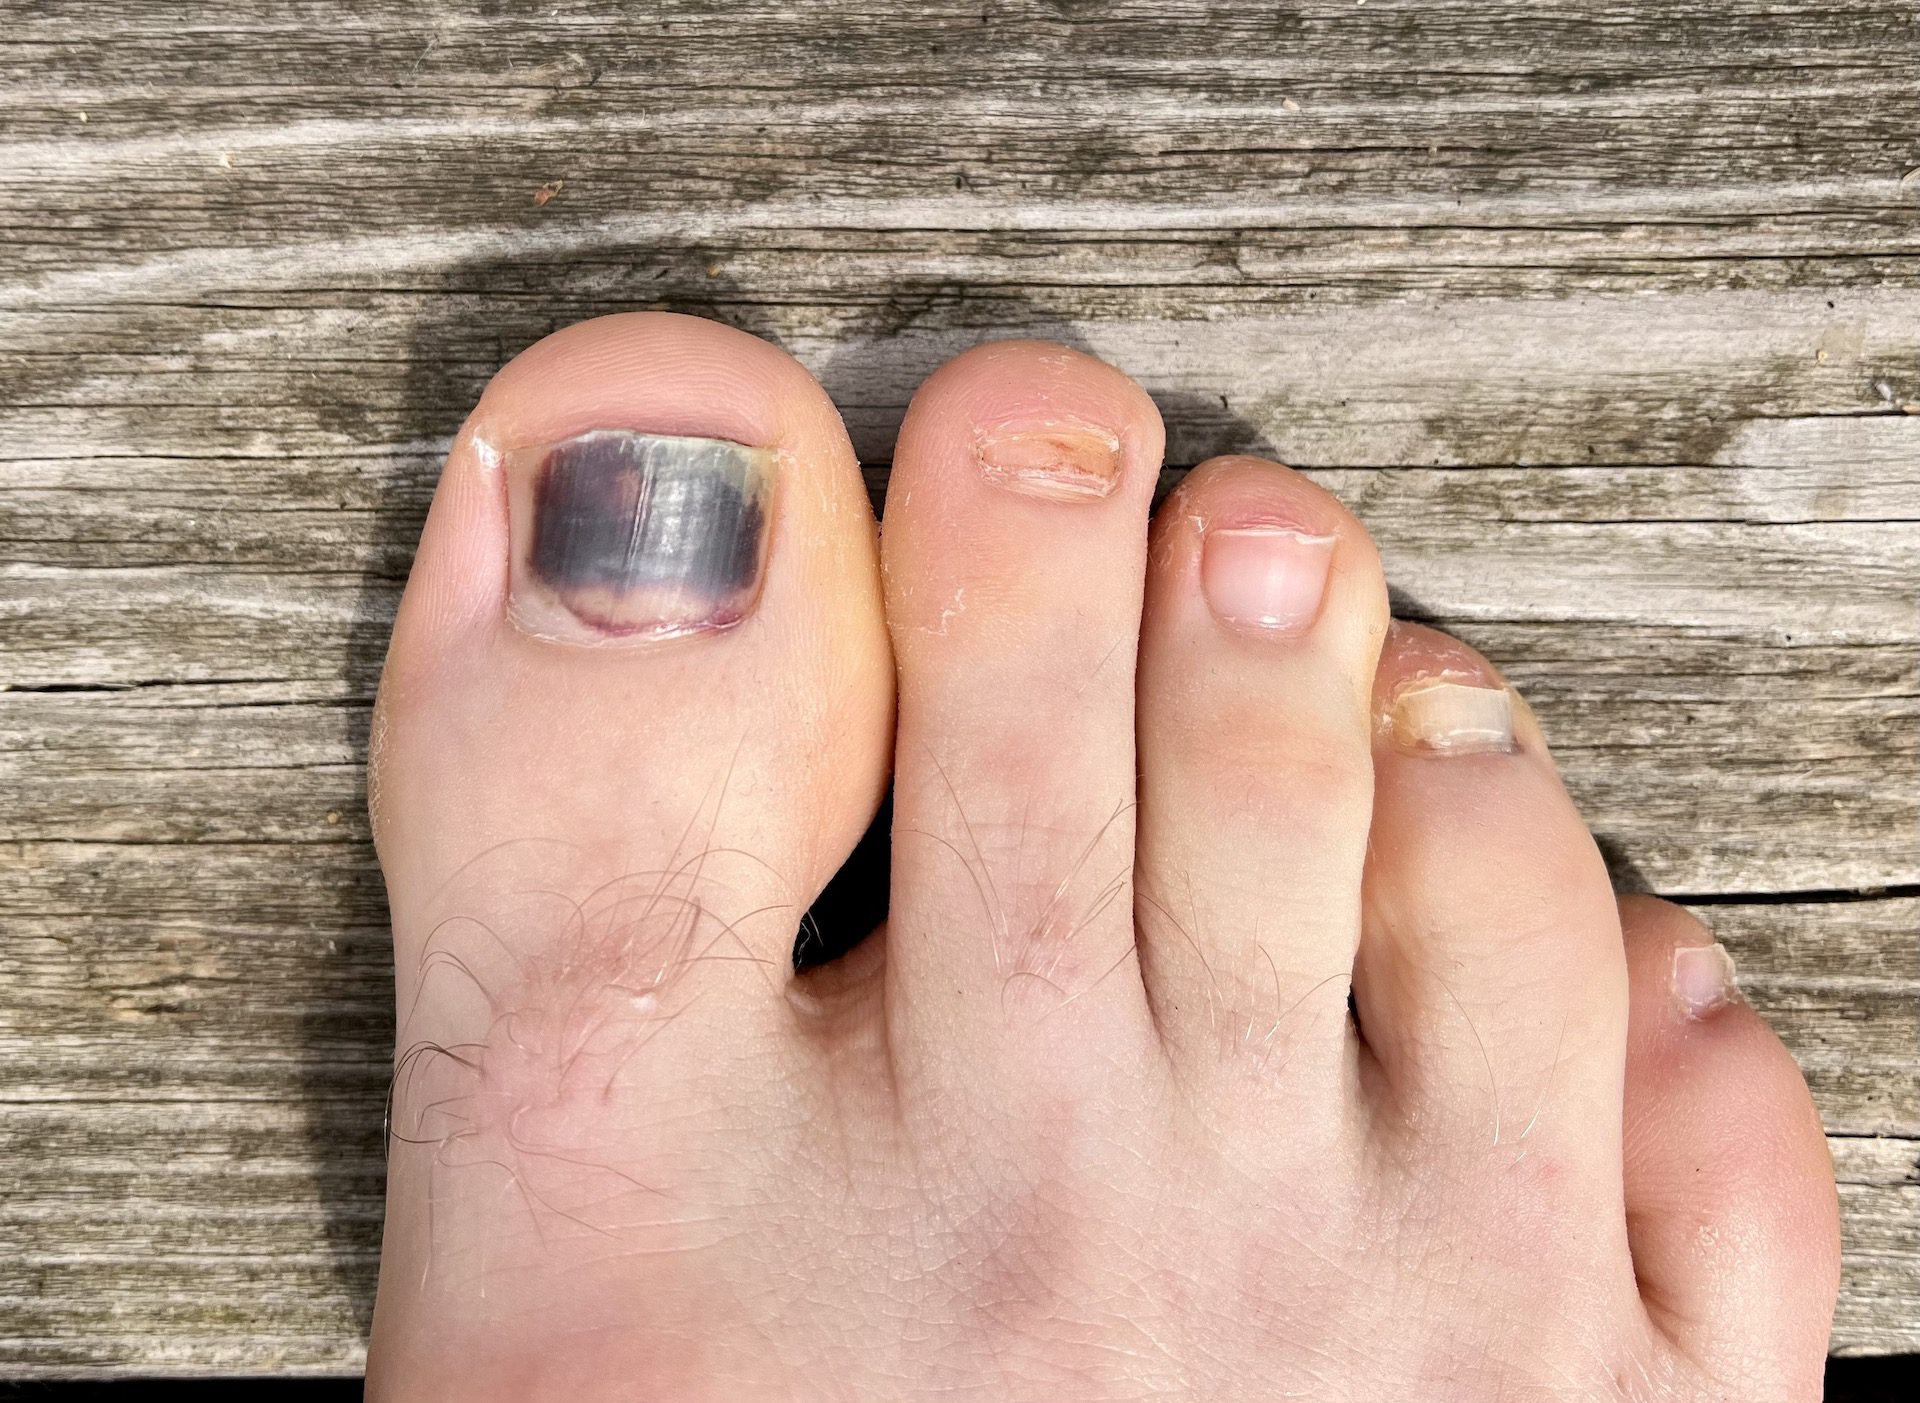 Yellow Toenails — Causes and Treatment - Canyon Oaks Foot & Ankle